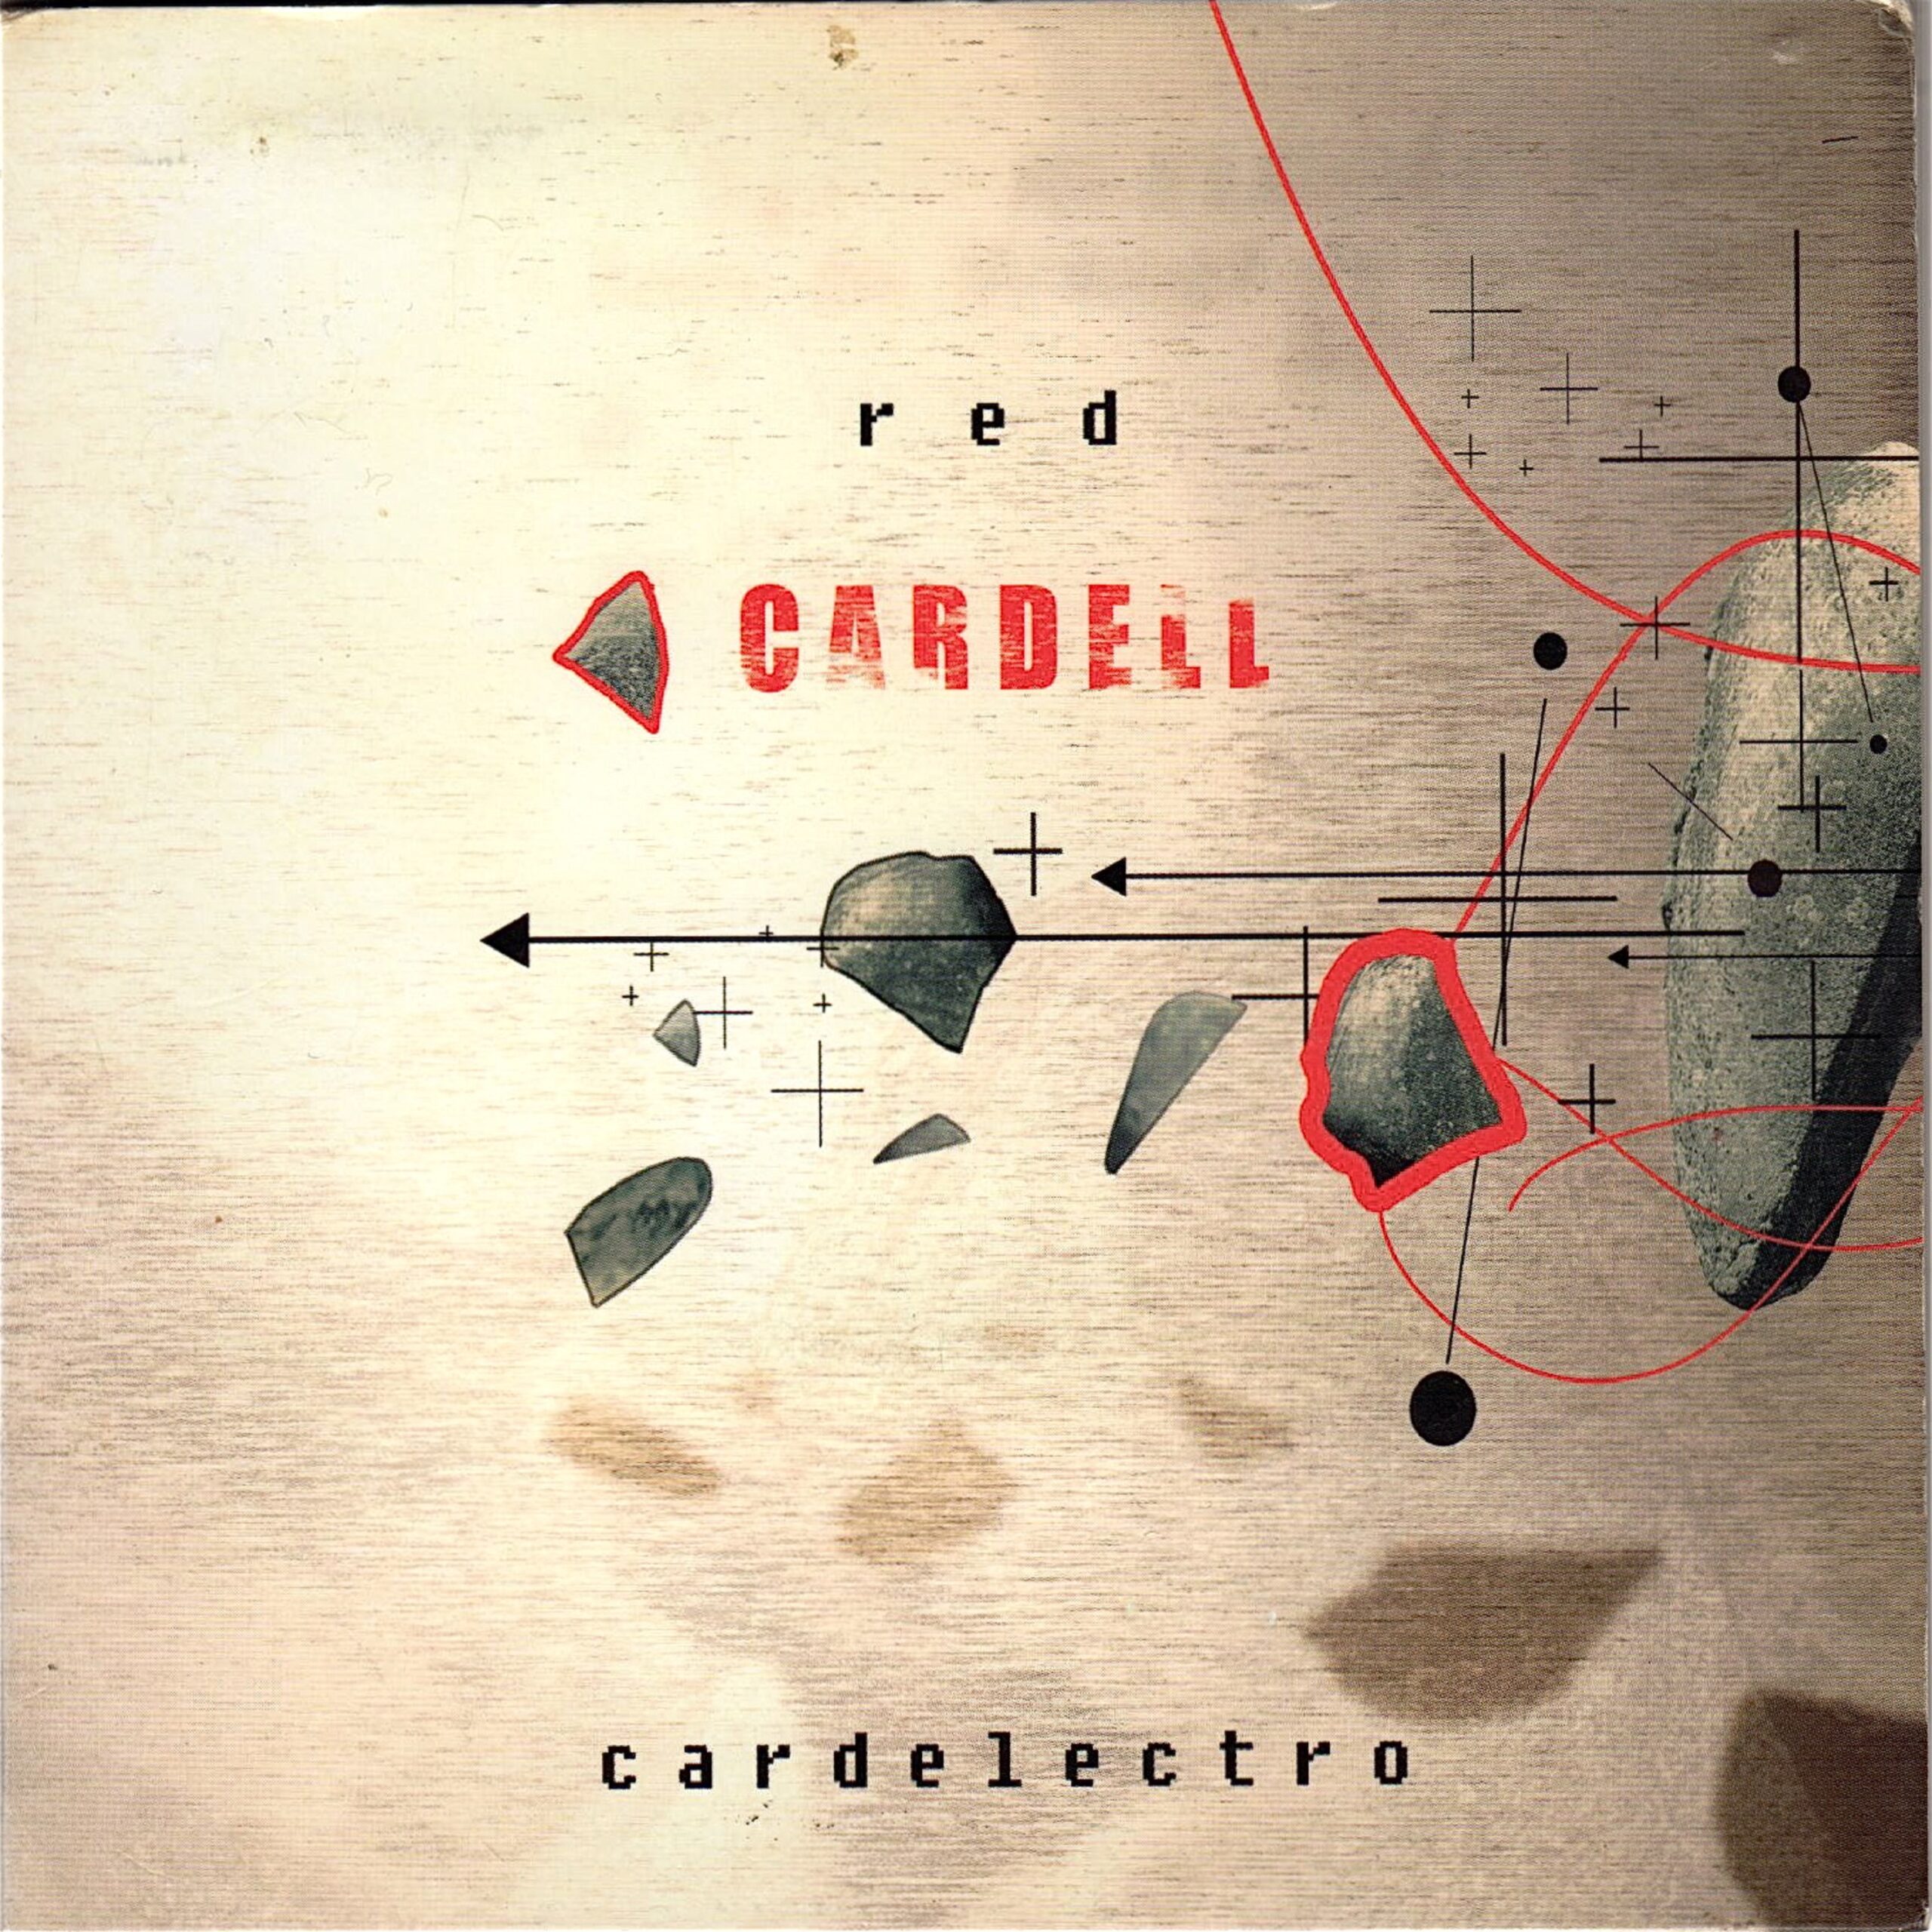 redcardell cardelectro